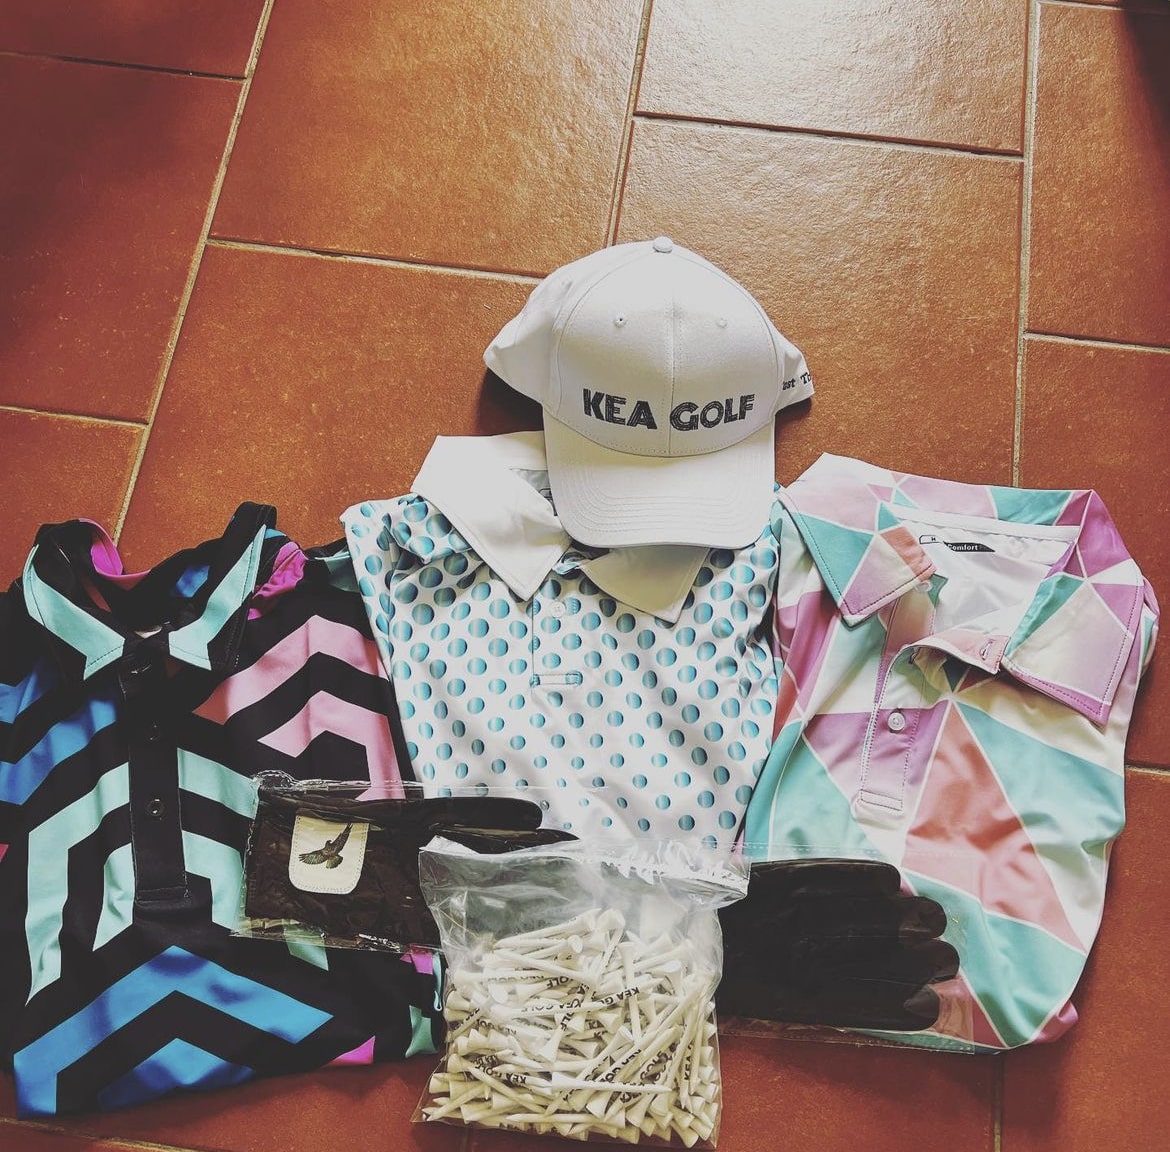 customers multi golf shirt and golf hat purchase from KEA Golf apparel